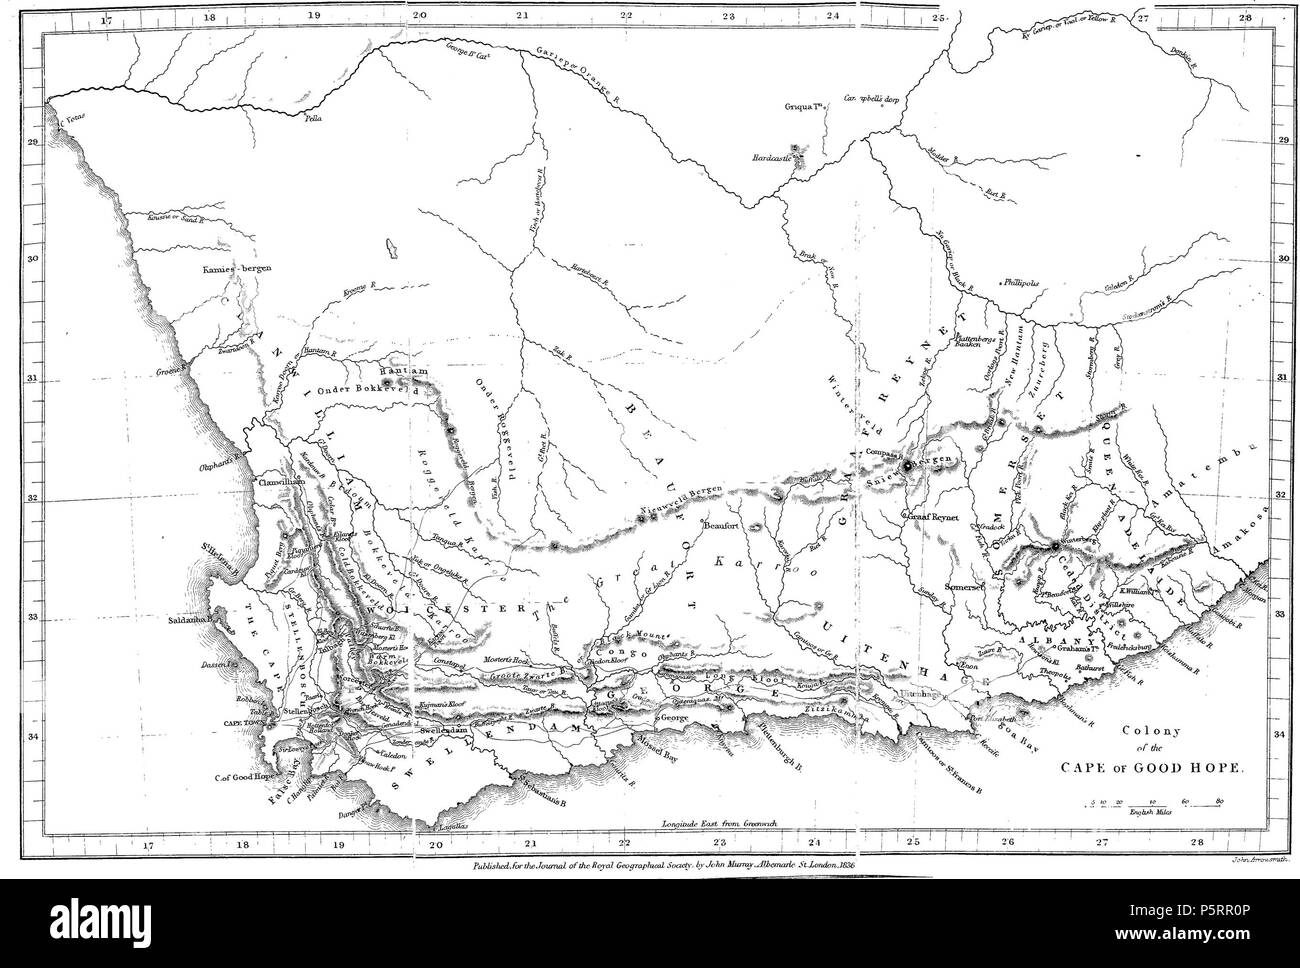 N/A. English: Map 'Colony of the Cape of Good Hope' as illustration to the article: C.C.Michell, 'On the Roads and Kloofs in the Cape Colony', In: The Journal of the Royal Geographical Society of London, vol.6, 1836, pp. 168-173 . 1836. John Arrowsmith (map); John Murray, Albermarle Str., London (printing press); The Journal of the Royal Geographical Society, vol.6, 1836 (publication) 268 Cape Colony 1836 Stock Photo